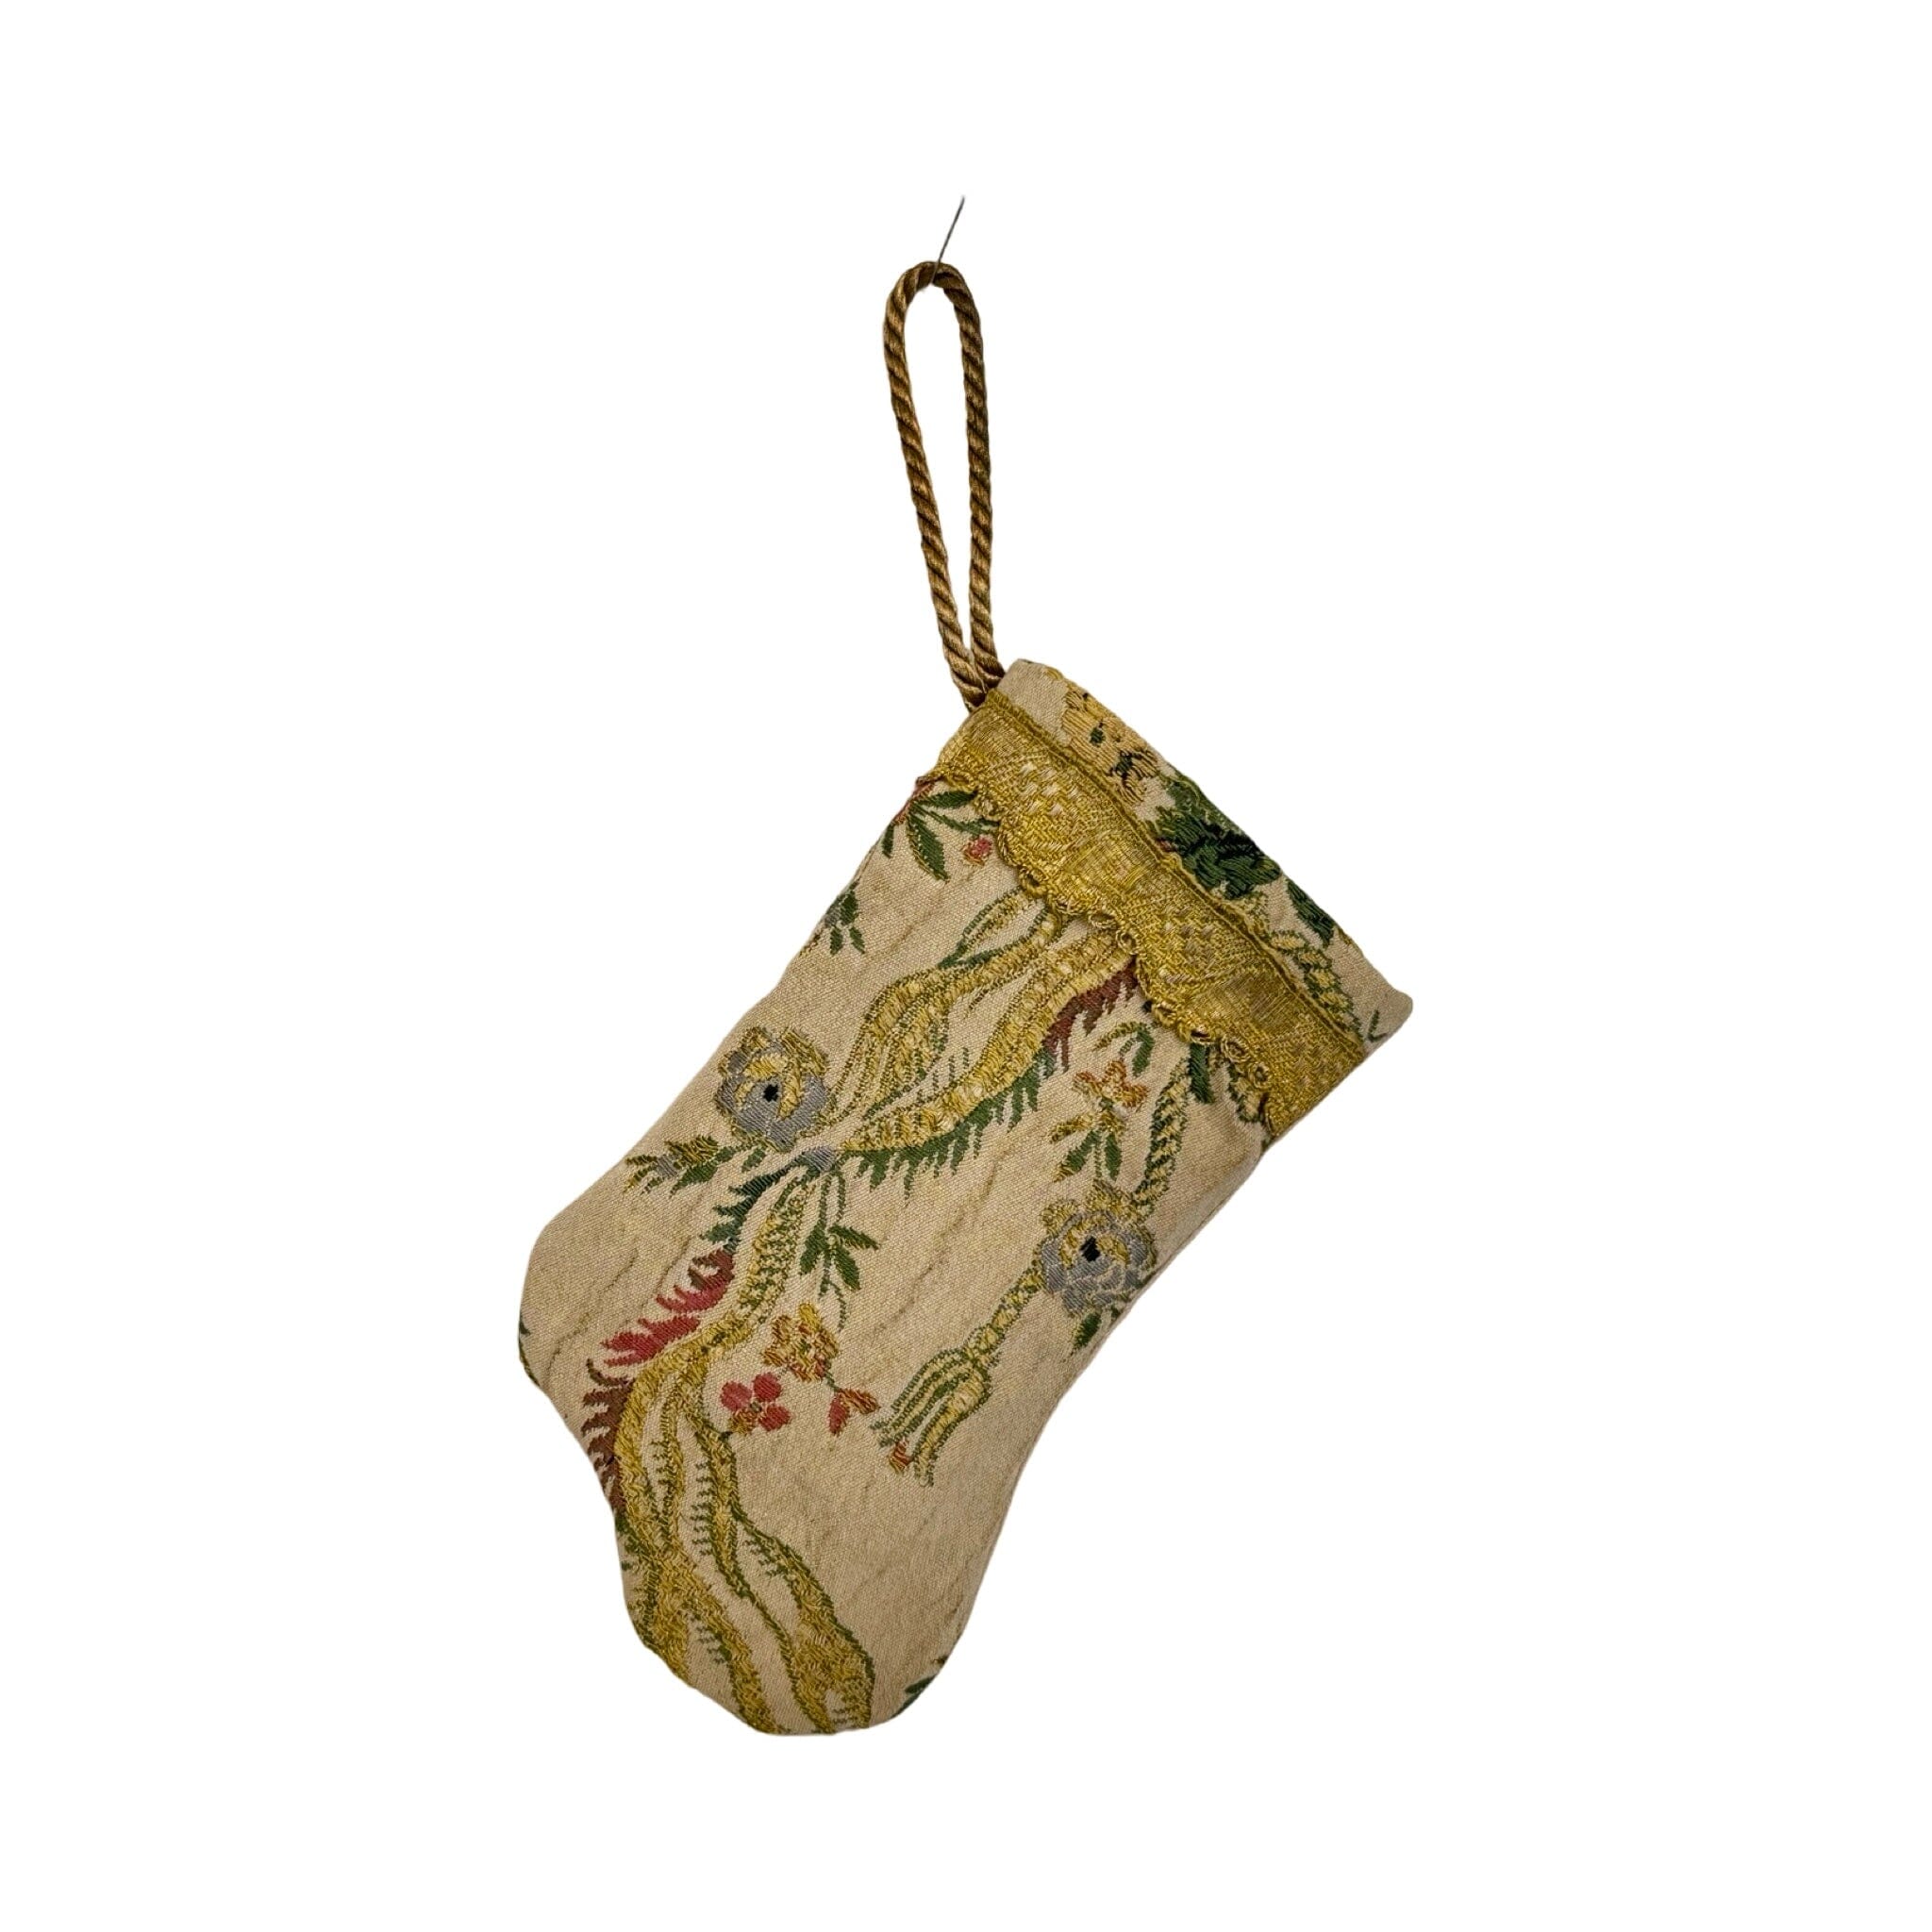 Handmade Mini Stocking Made From Vintage Fabric and Trims- Antique Sand Floral Ornament B. Viz Design H 